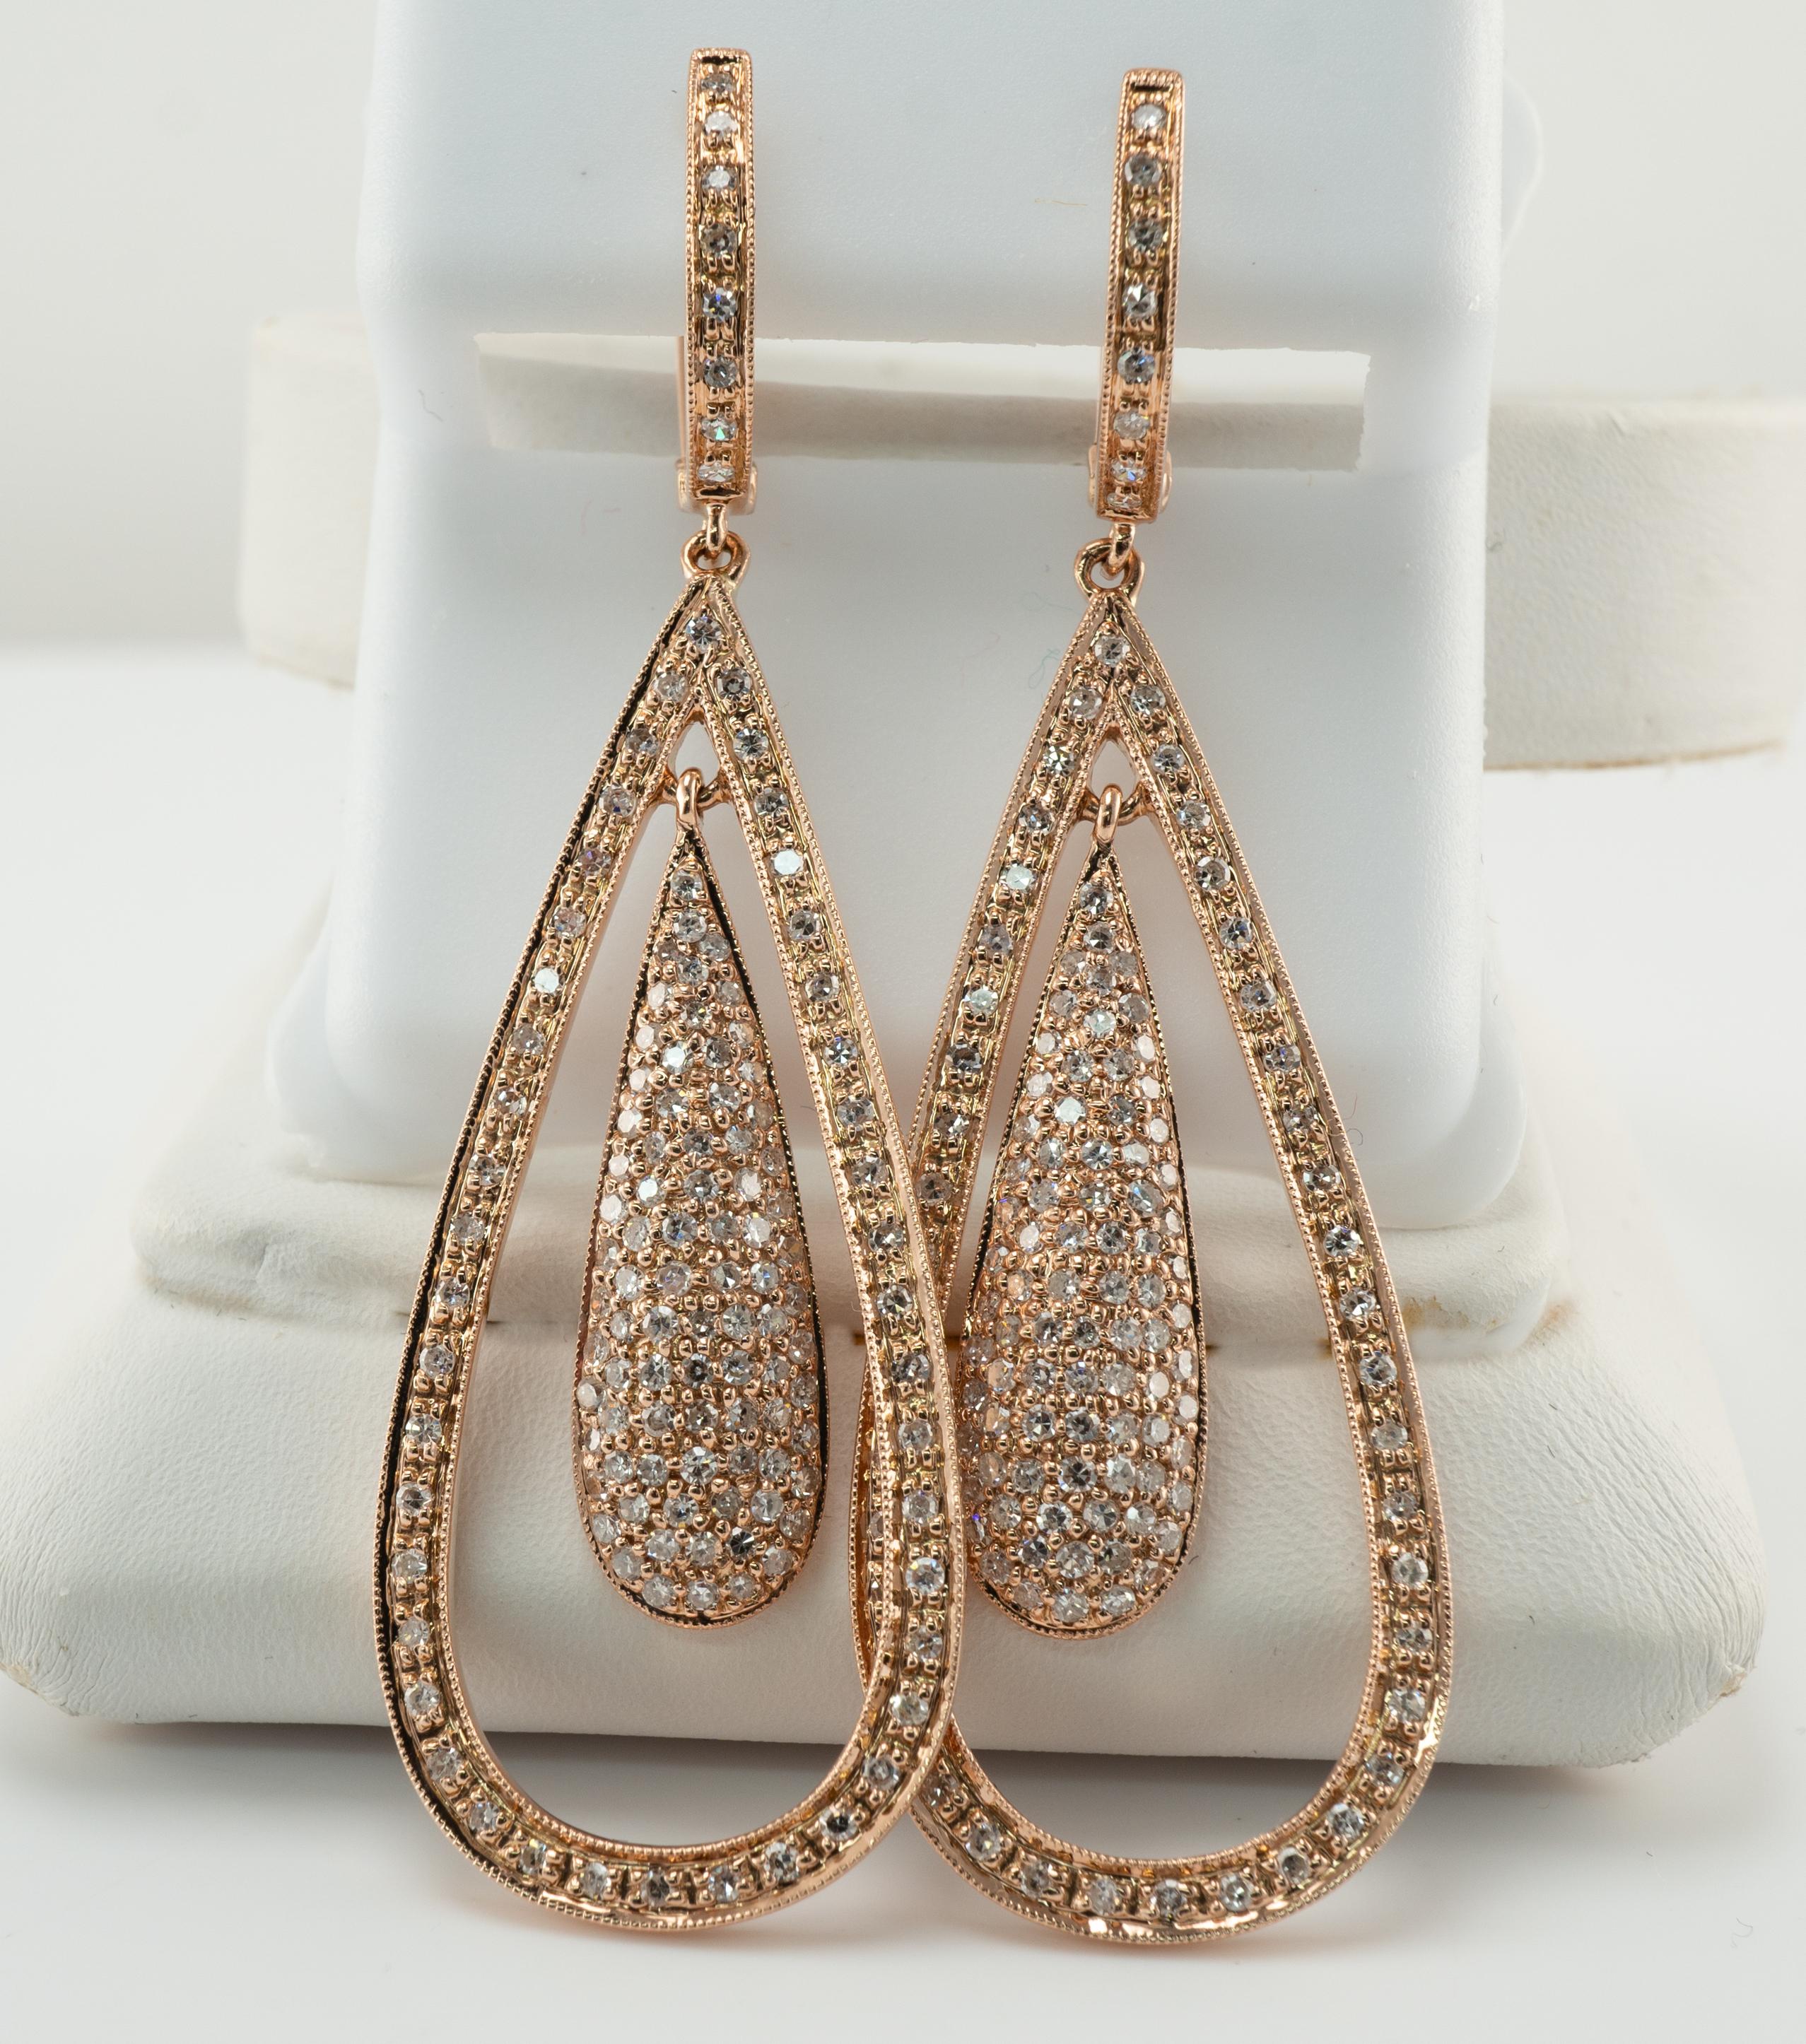 Dangle Natural Diamond Earrings 14K Rose Gold Teardrop 2.60 TDW

These estate earrings are crafted in solid 14K Rose Gold.
The earrings hold 130 diamonds in each earring = 260 diamonds for pair.
The total diamond weight for the pair is 2.60 carats